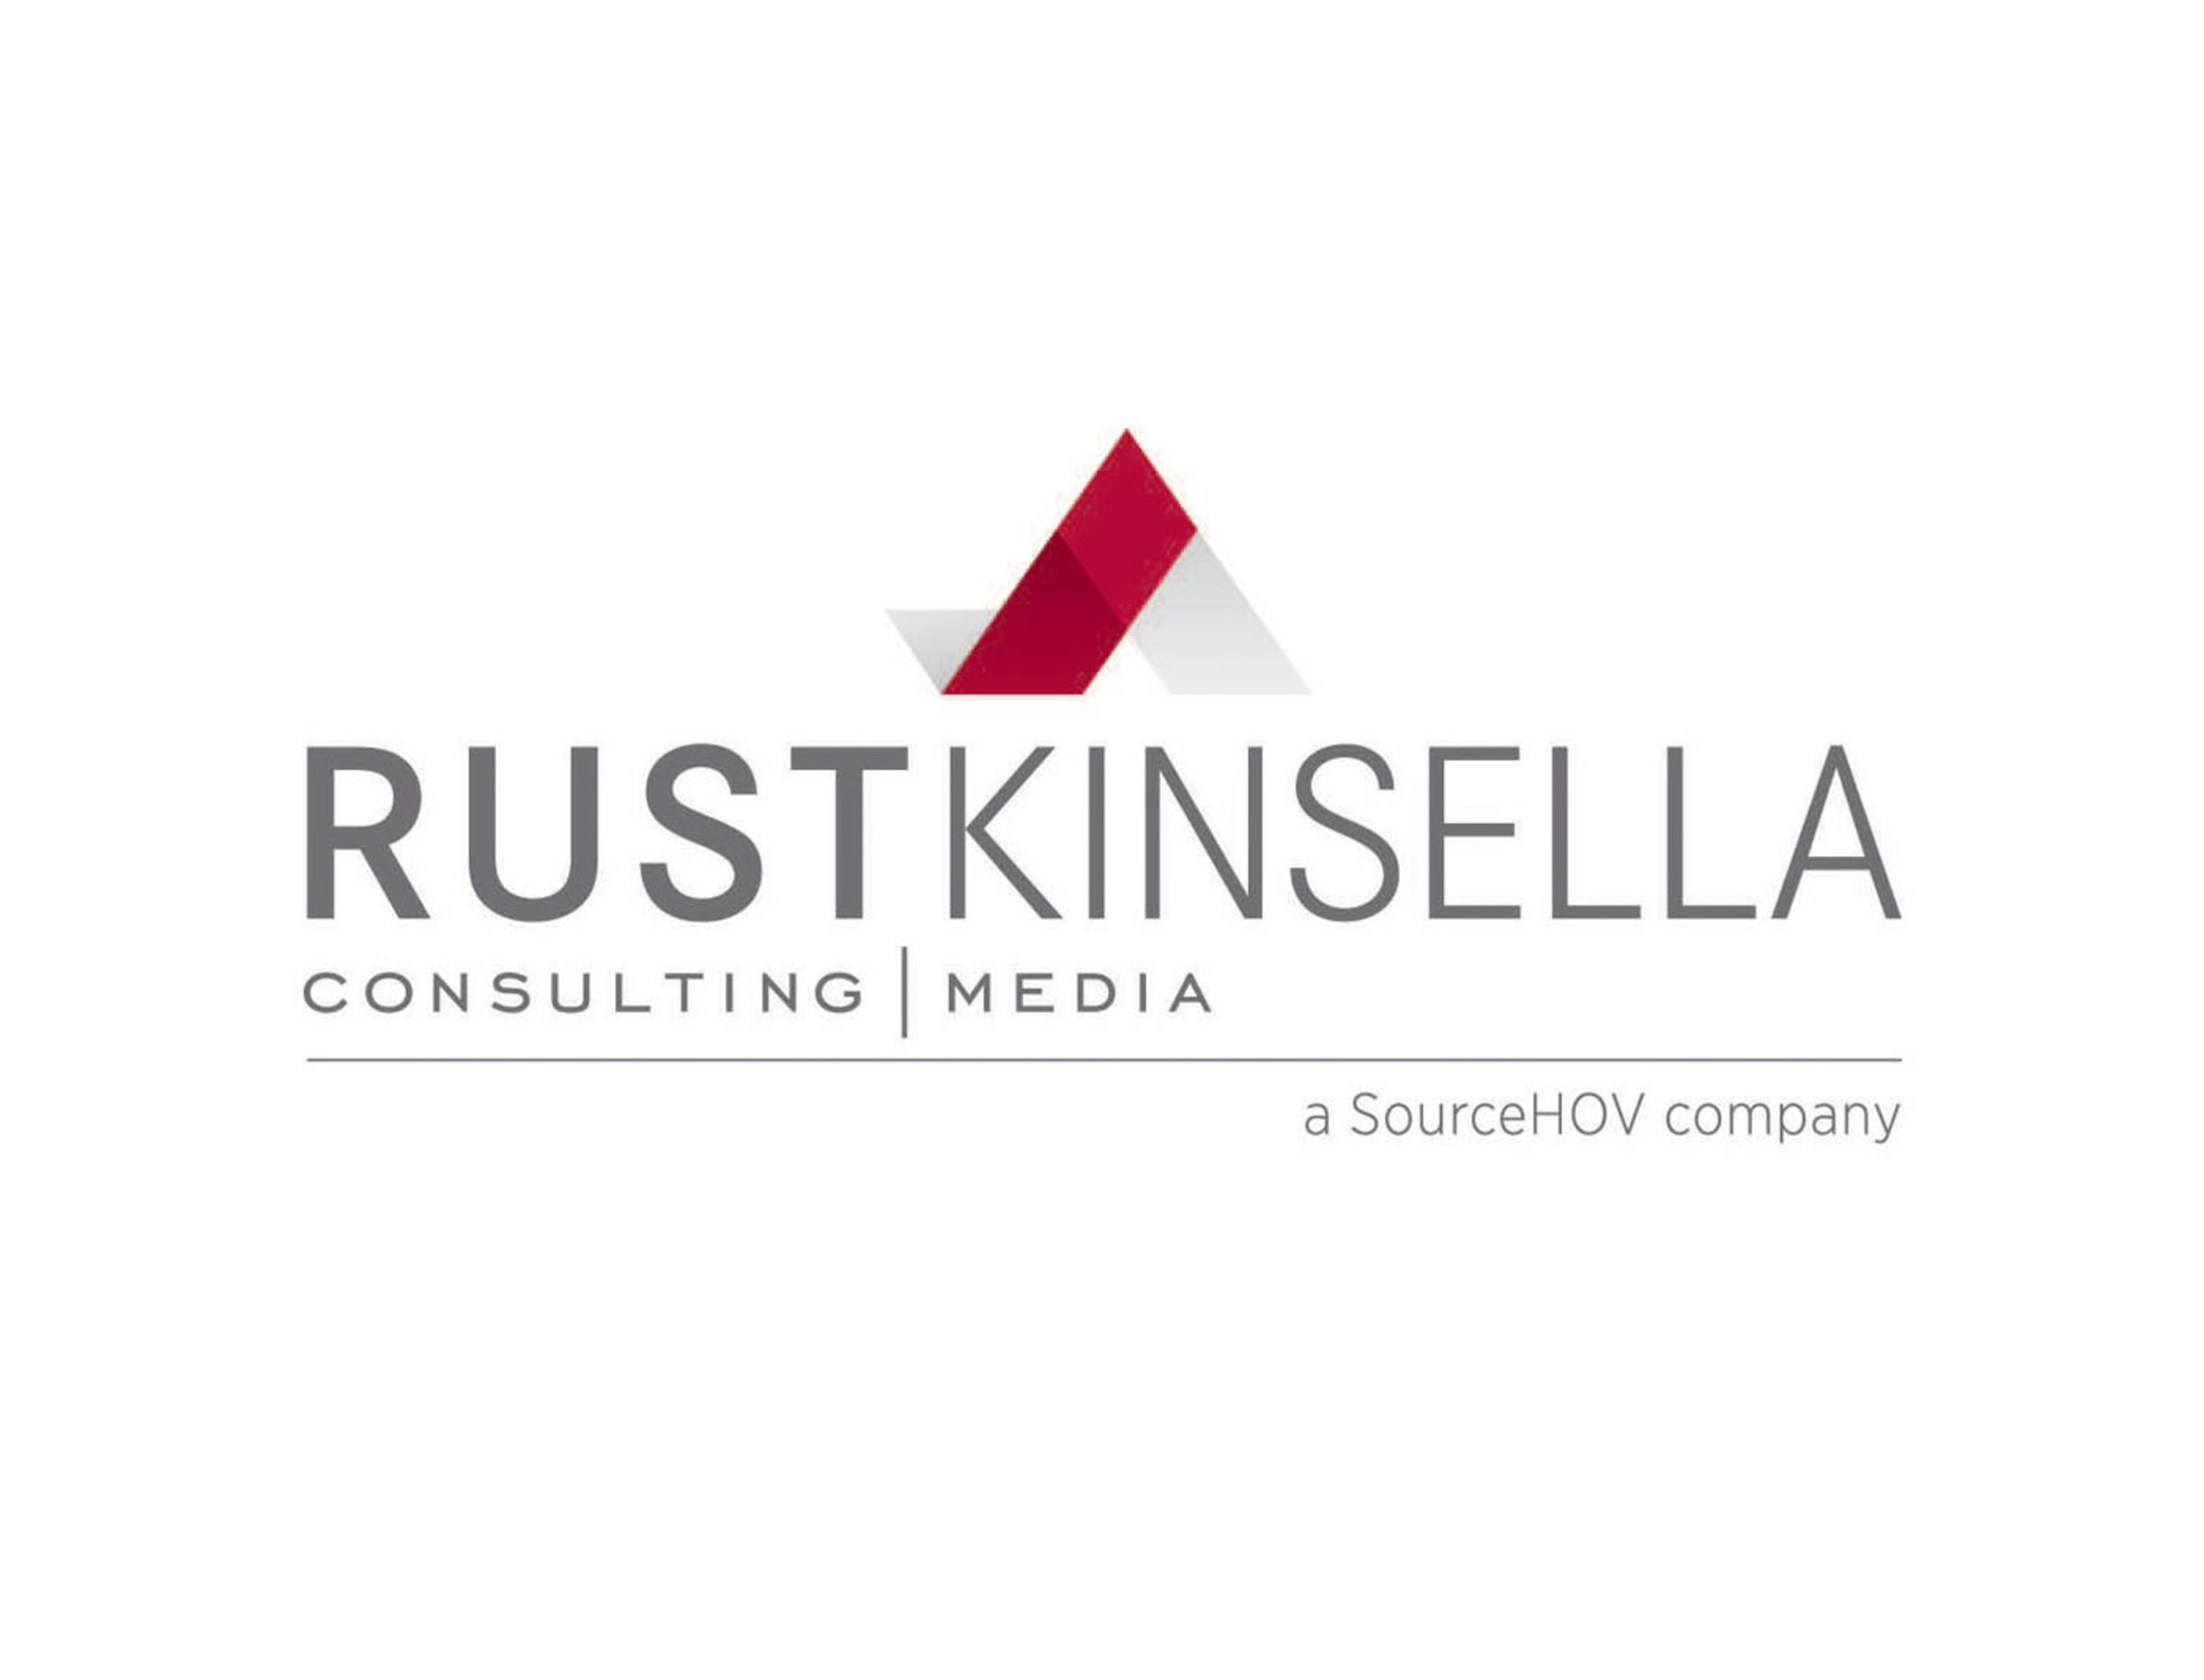 The teams at Rust Consulting, a SourceHOV company, and Kinsella Media, a SourceHOV company, possess the experience and expertise to drive client success in class actions, regulated settlements, and other complex and time-sensitive programs. (PRNewsFoto/Kinsella Media, LLC) (PRNewsFoto/KINSELLA MEDIA, LLC)